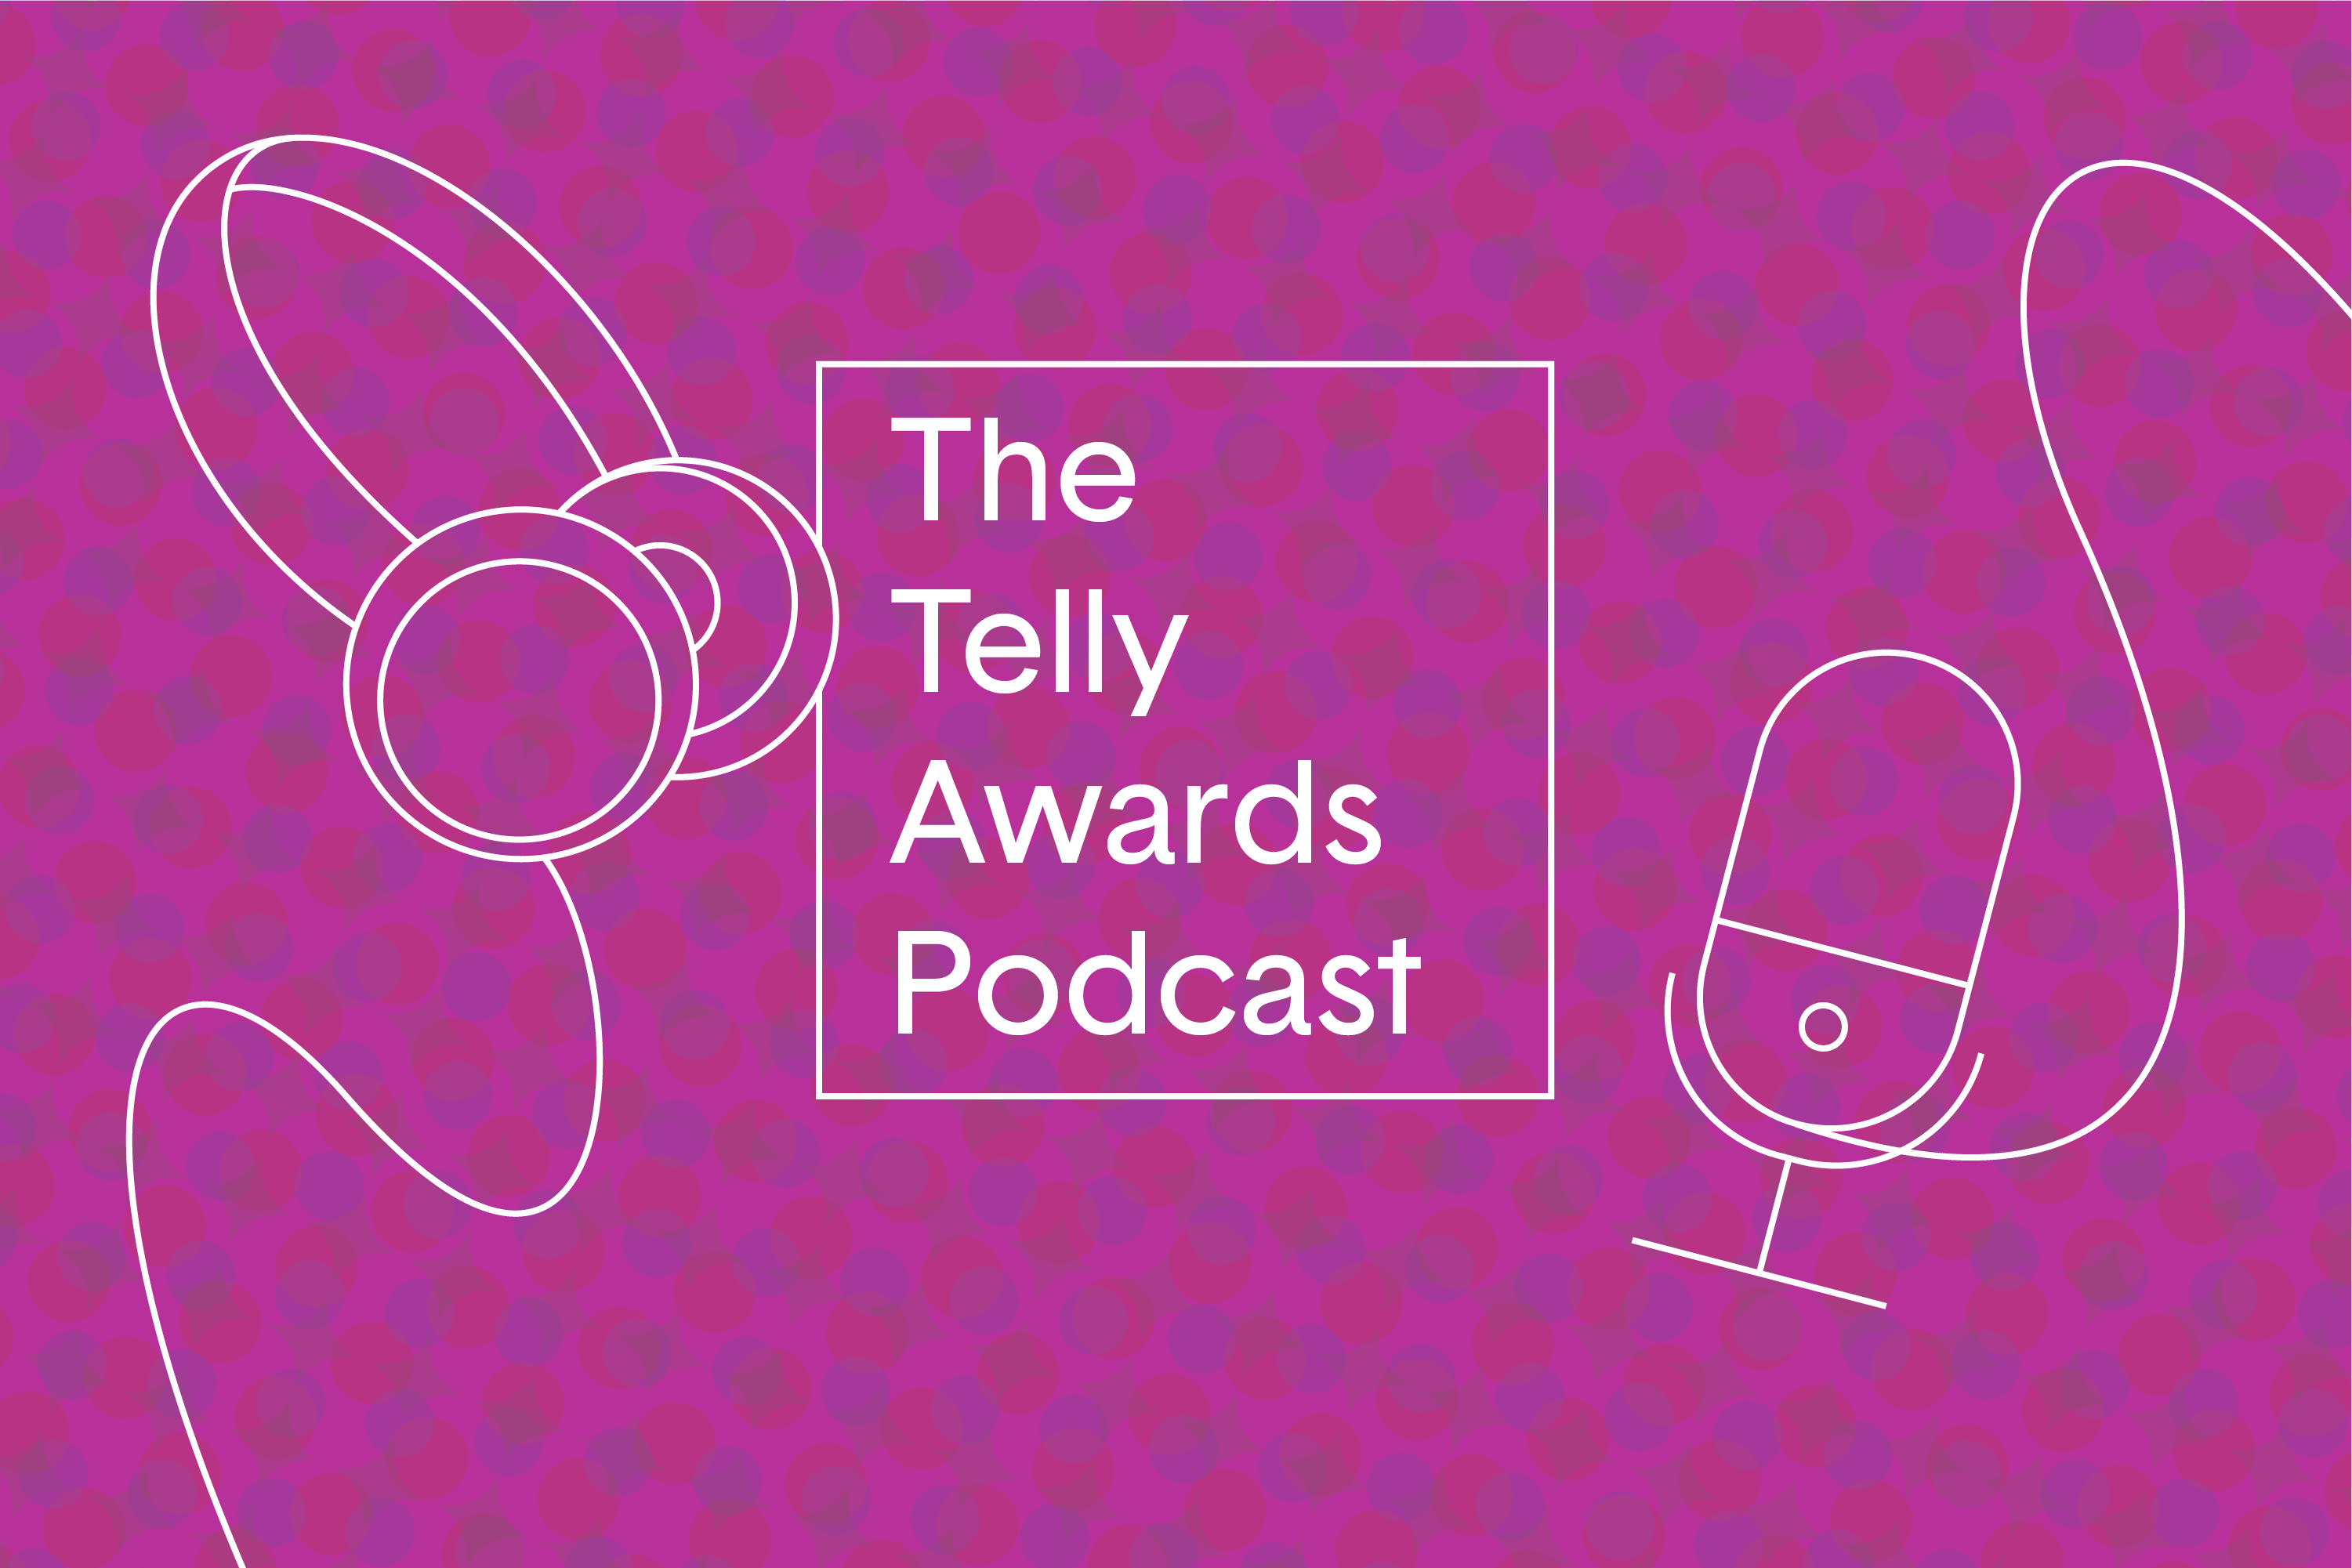 The Telly Awards Launches First Episode of Original Podcast